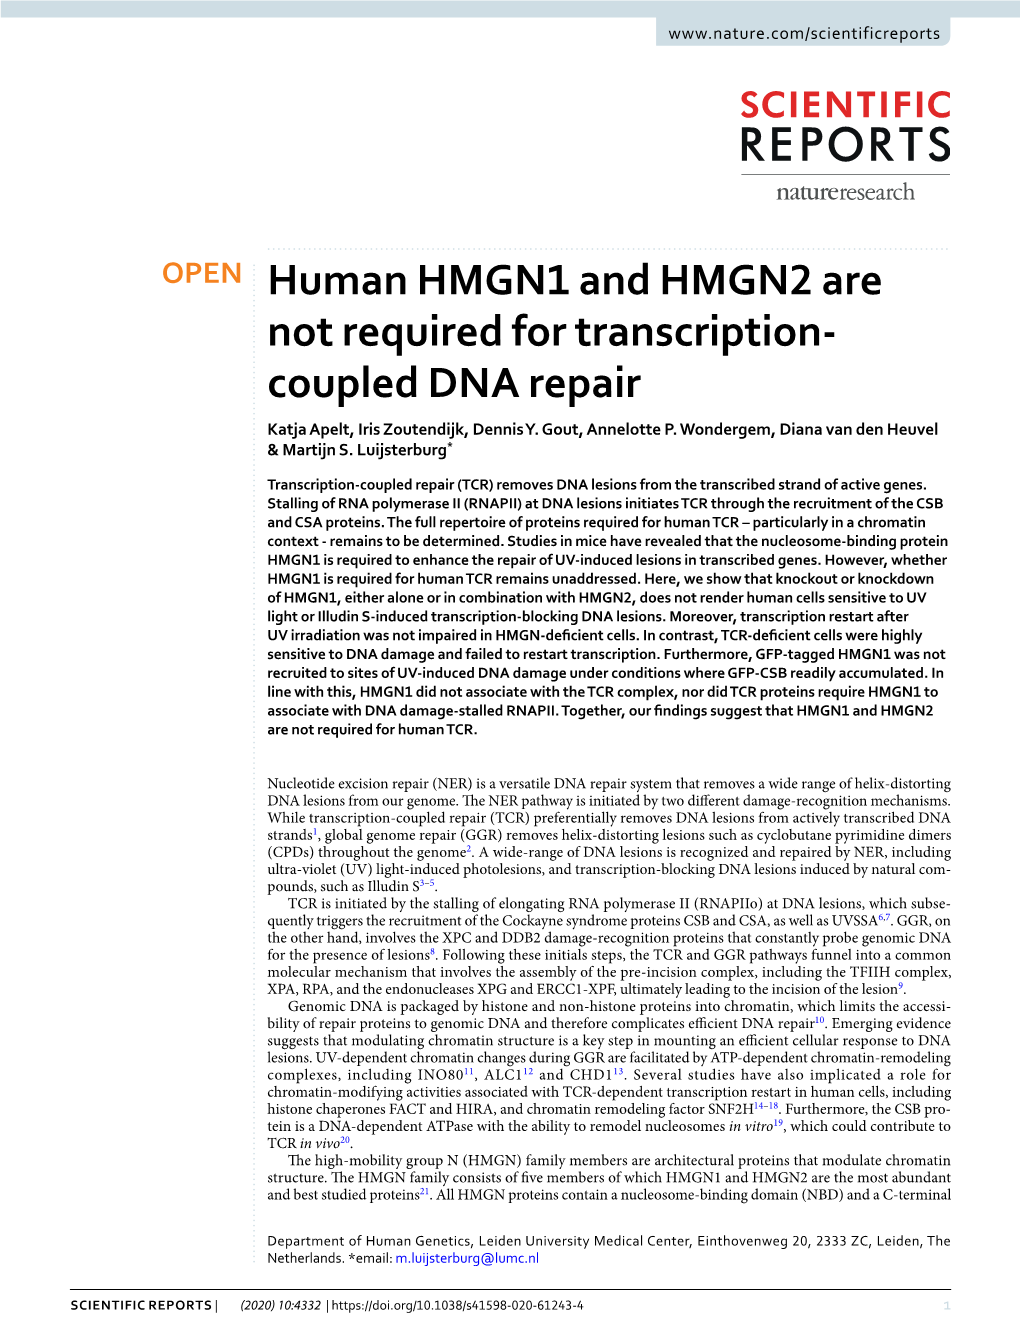 Human HMGN1 and HMGN2 Are Not Required for Transcription- Coupled DNA Repair Katja Apelt, Iris Zoutendijk, Dennis Y